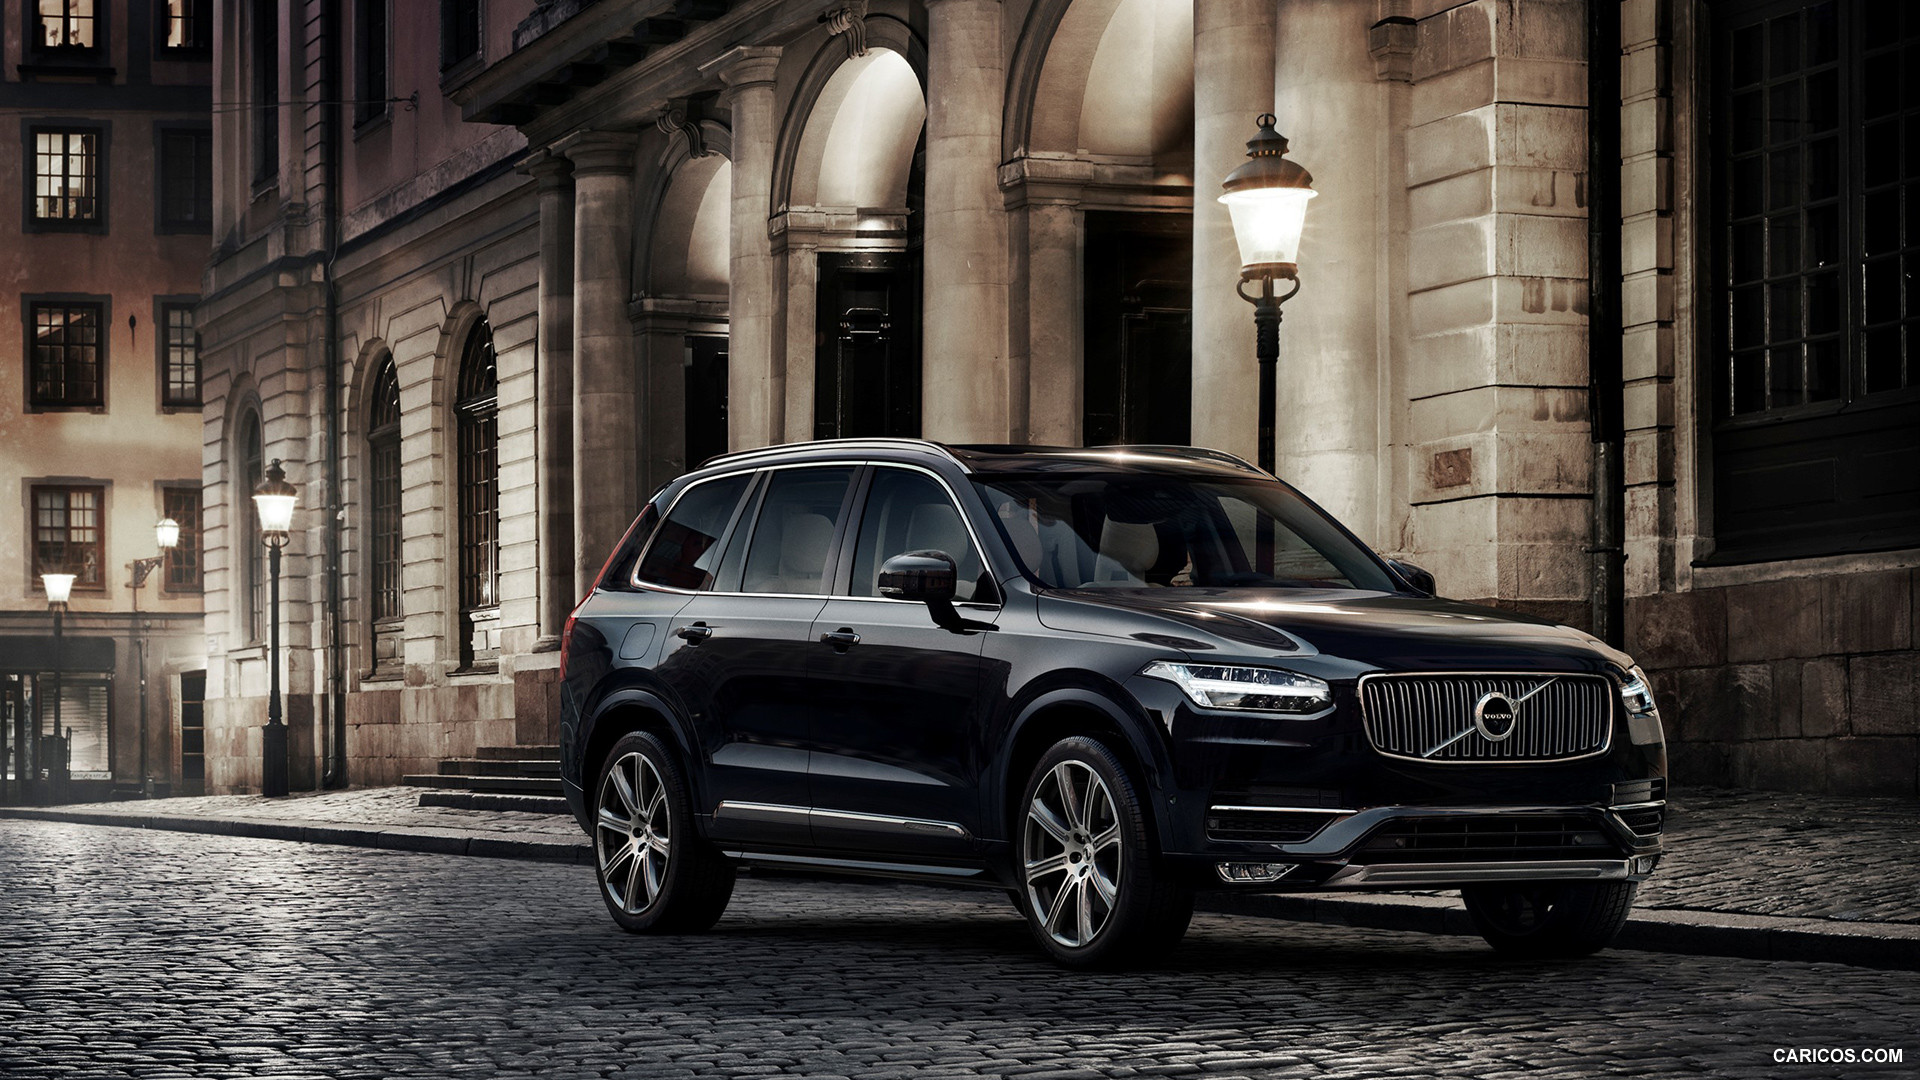 Free download 2015 Volvo XC90 Front HD Wallpaper 16 [1920x1080] for ...